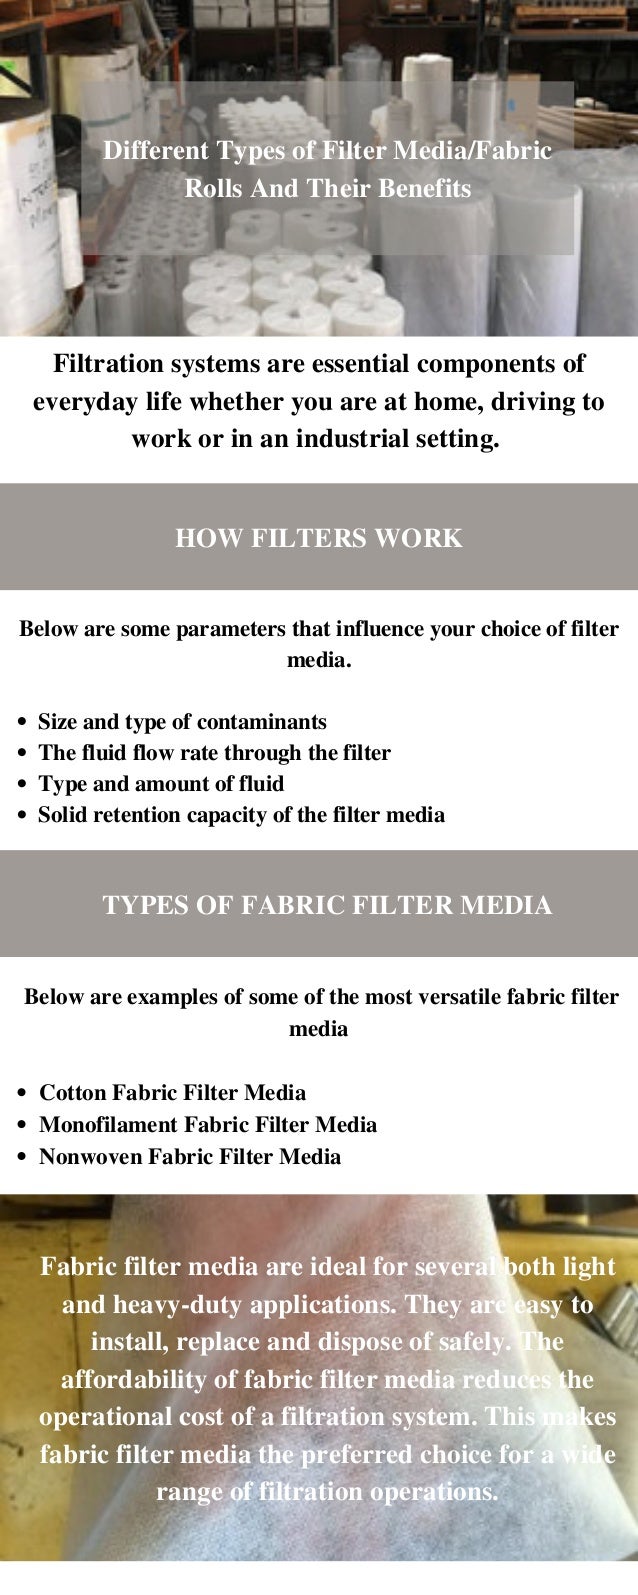 Fabric filter media are ideal for several both light
and heavy-duty applications. They are easy to
install, replace and dispose of safely. The
affordability of fabric filter media reduces the
operational cost of a filtration system. This makes
fabric filter media the preferred choice for a wide
range of filtration operations.
Different Types of Filter Media/Fabric
Rolls And Their Benefits
Filtration systems are essential components of
everyday life whether you are at home, driving to
work or in an industrial setting.
HOW FILTERS WORK
Size and type of contaminants
The fluid flow rate through the filter
Type and amount of fluid
Solid retention capacity of the filter media
Below are some parameters that influence your choice of filter
media.


TYPES OF FABRIC FILTER MEDIA
Cotton Fabric Filter Media
Monofilament Fabric Filter Media
Nonwoven Fabric Filter Media
Below are examples of some of the most versatile fabric filter
media
 